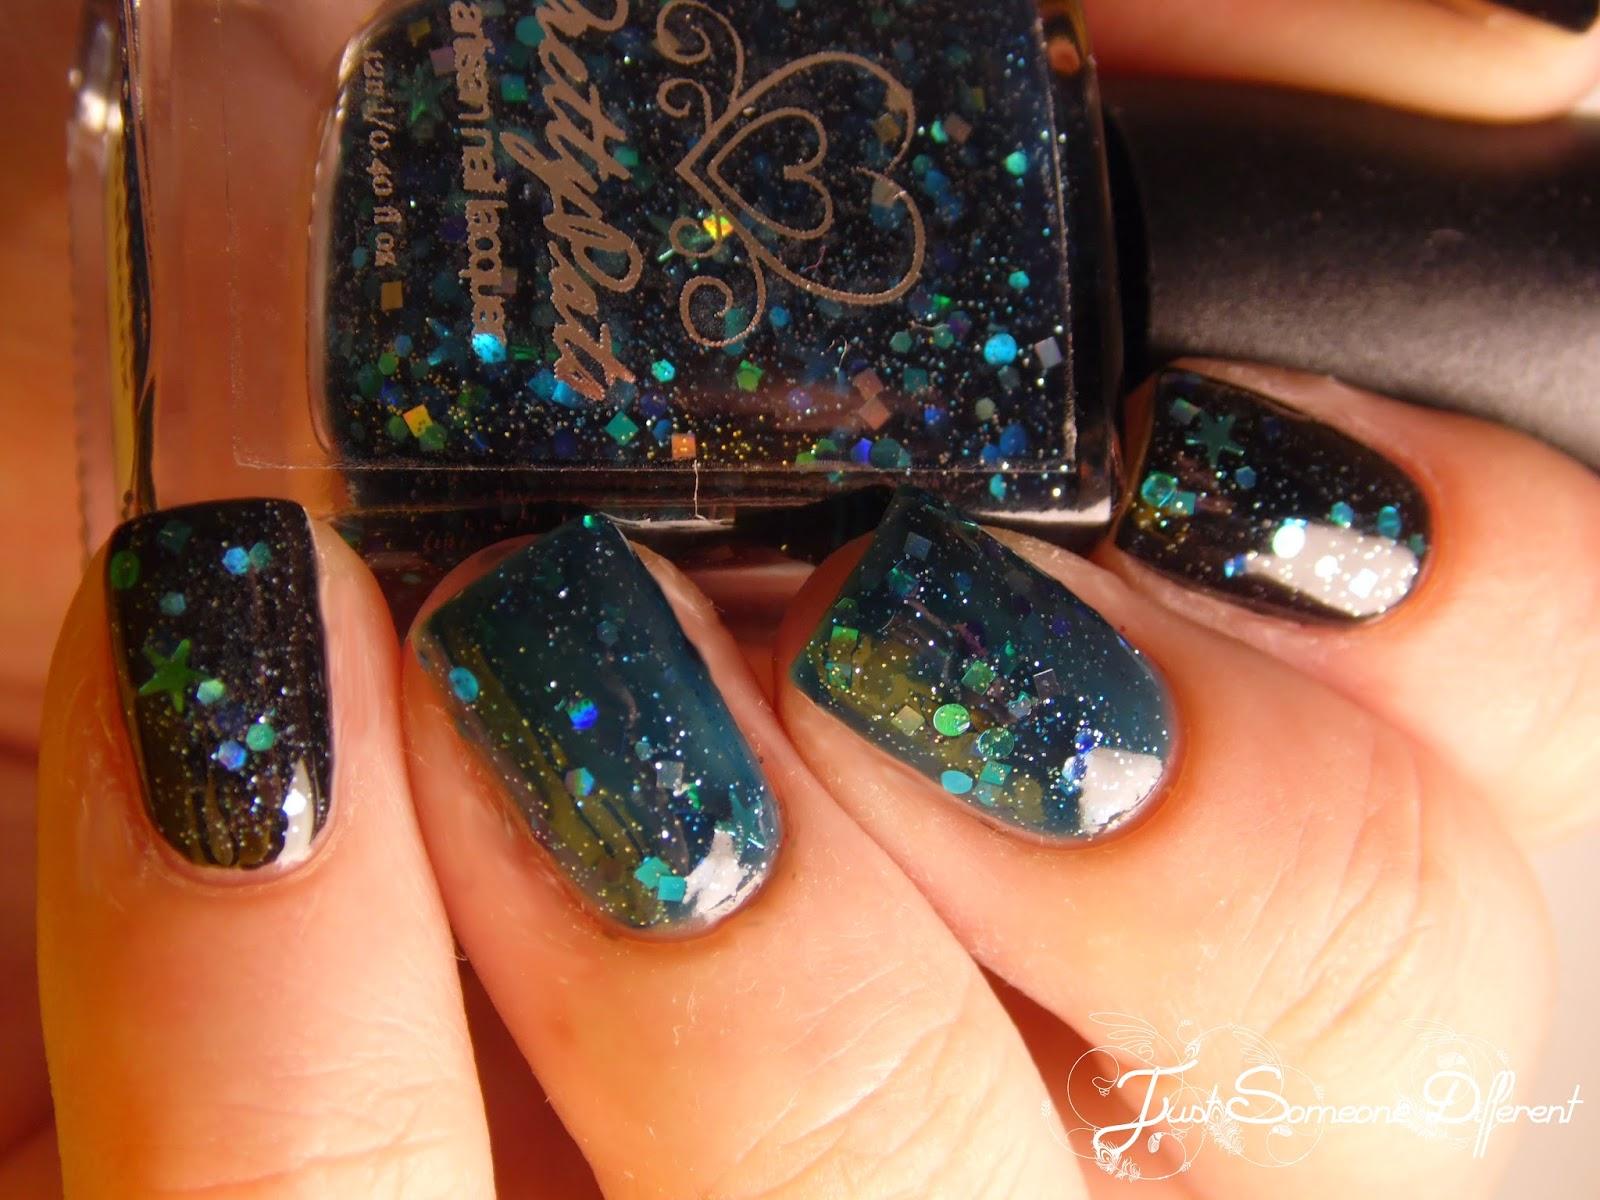 PrettyPotsPolish - Wizard of Oz , Core and Out of this World collections